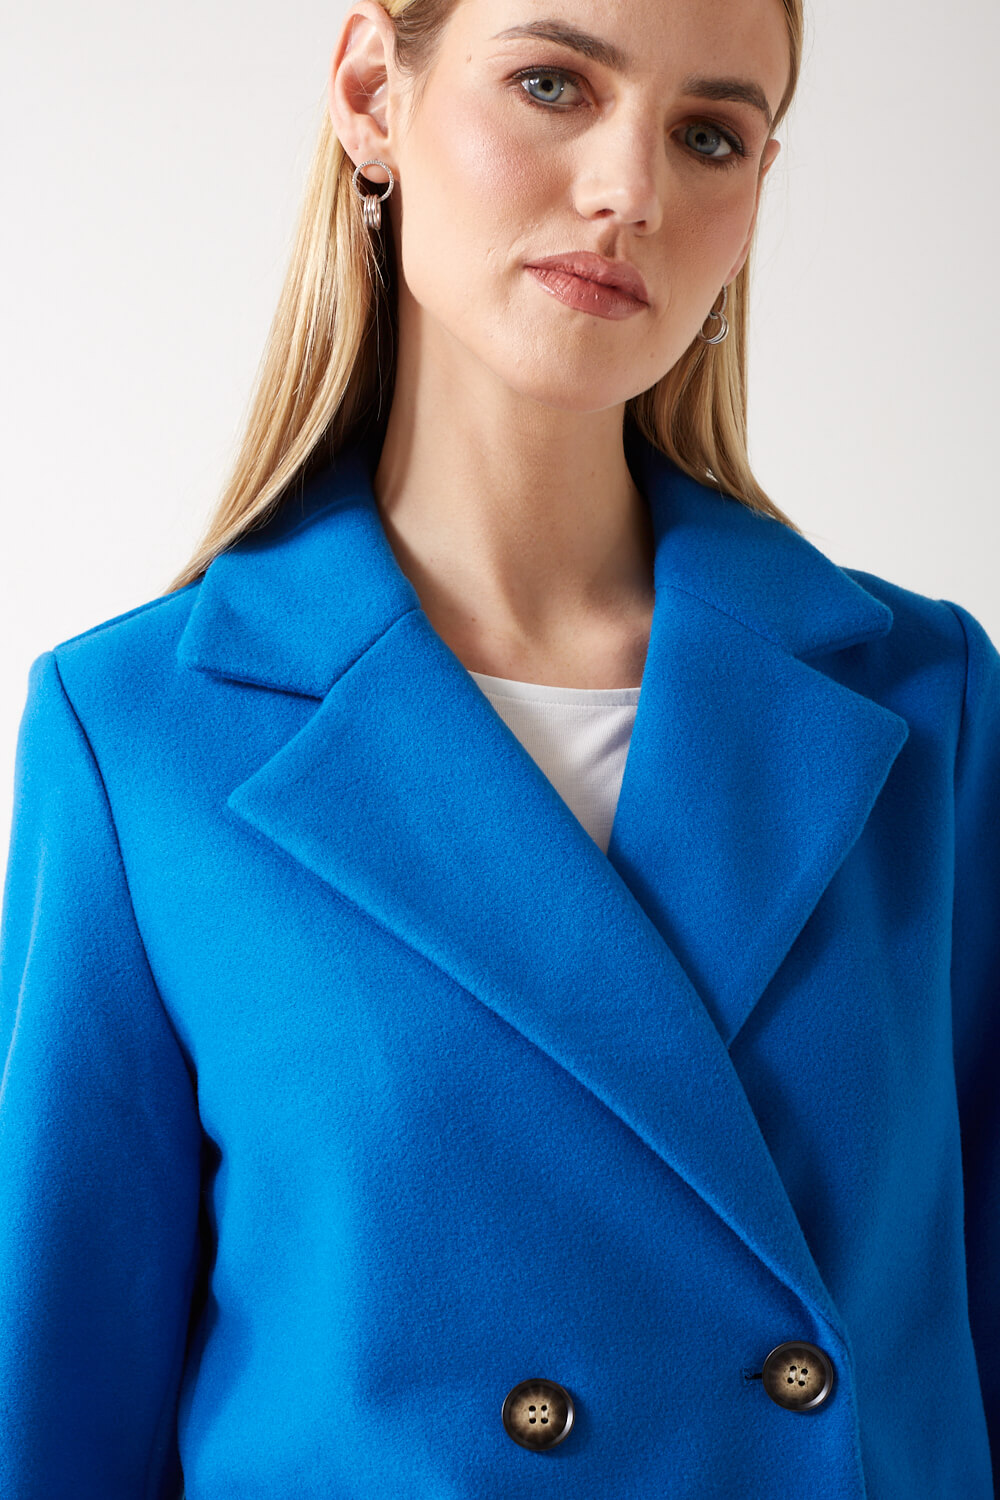 Vero Moda Vince Tailored Coat in Blue | iCLOTHING - iCLOTHING